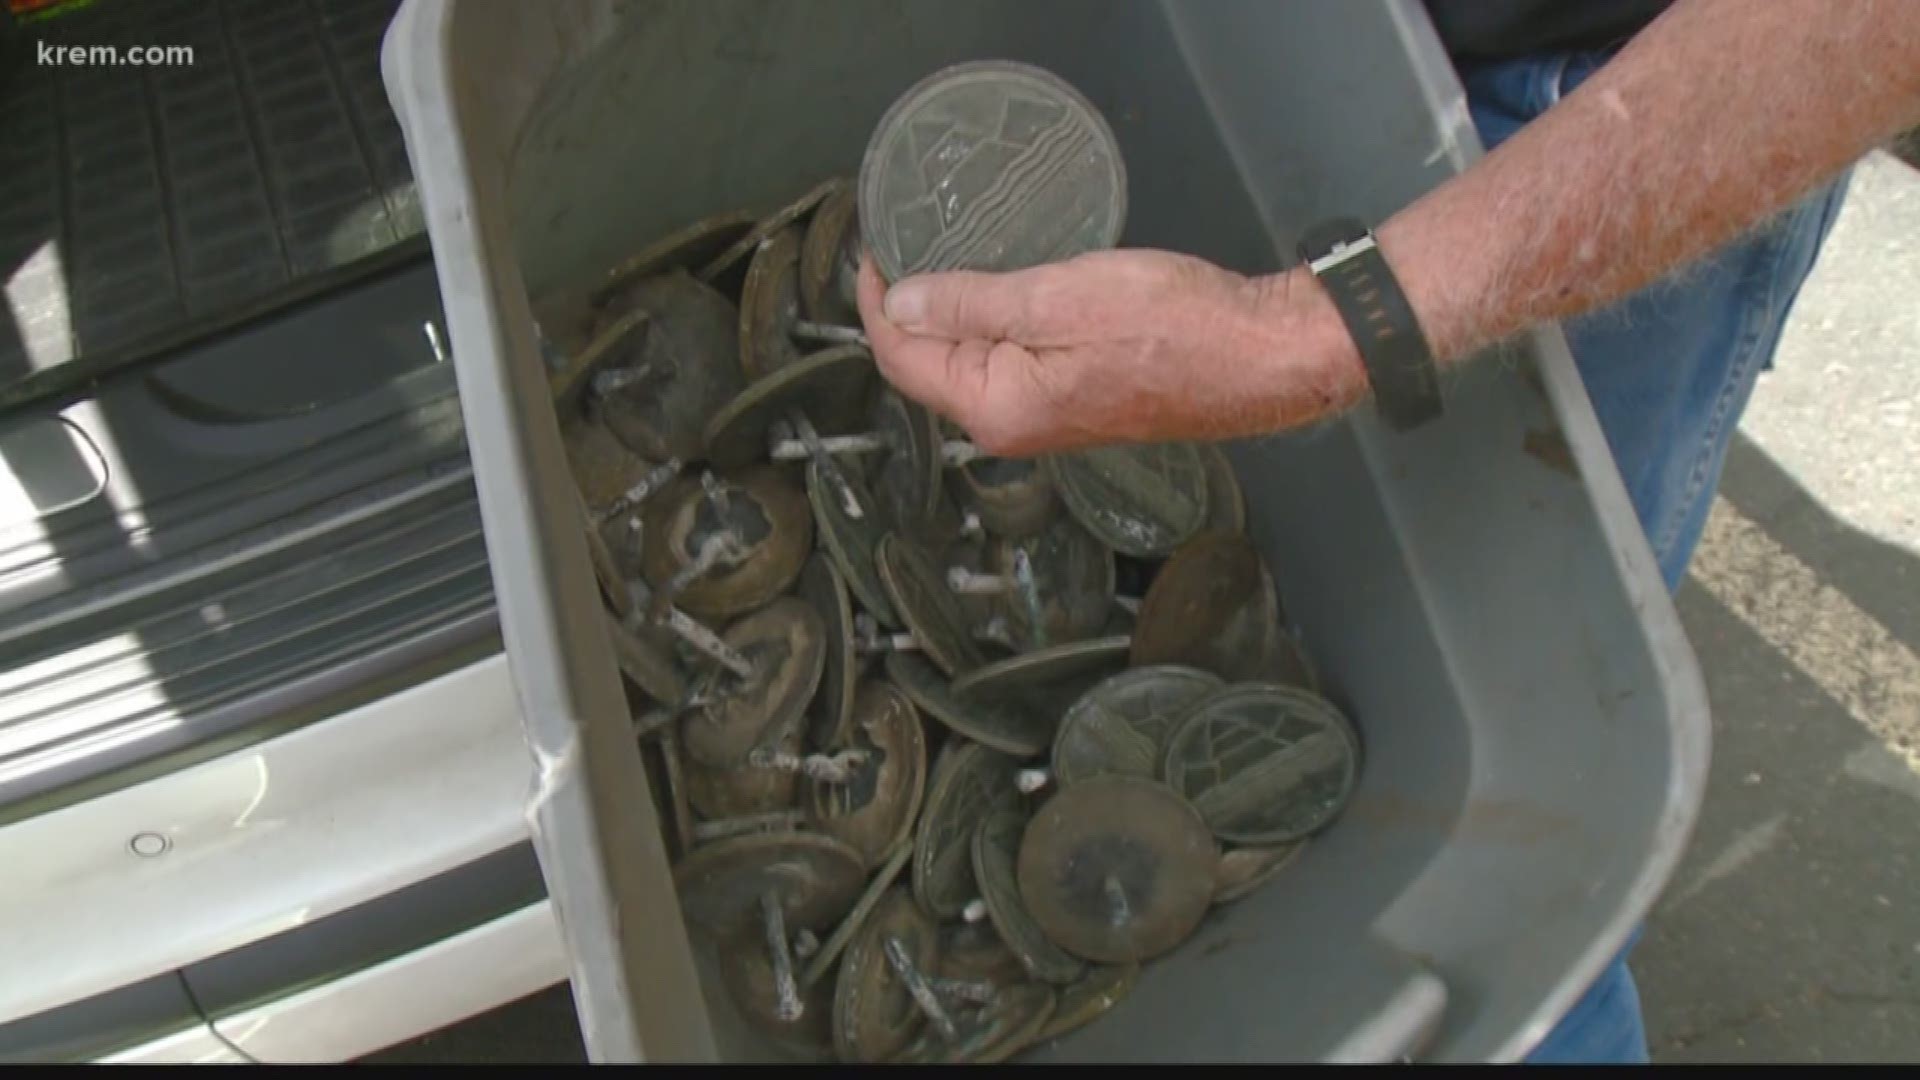 Some of the medallions were stolen, so the parks department decided to pull the rest out and store them in a safe place.